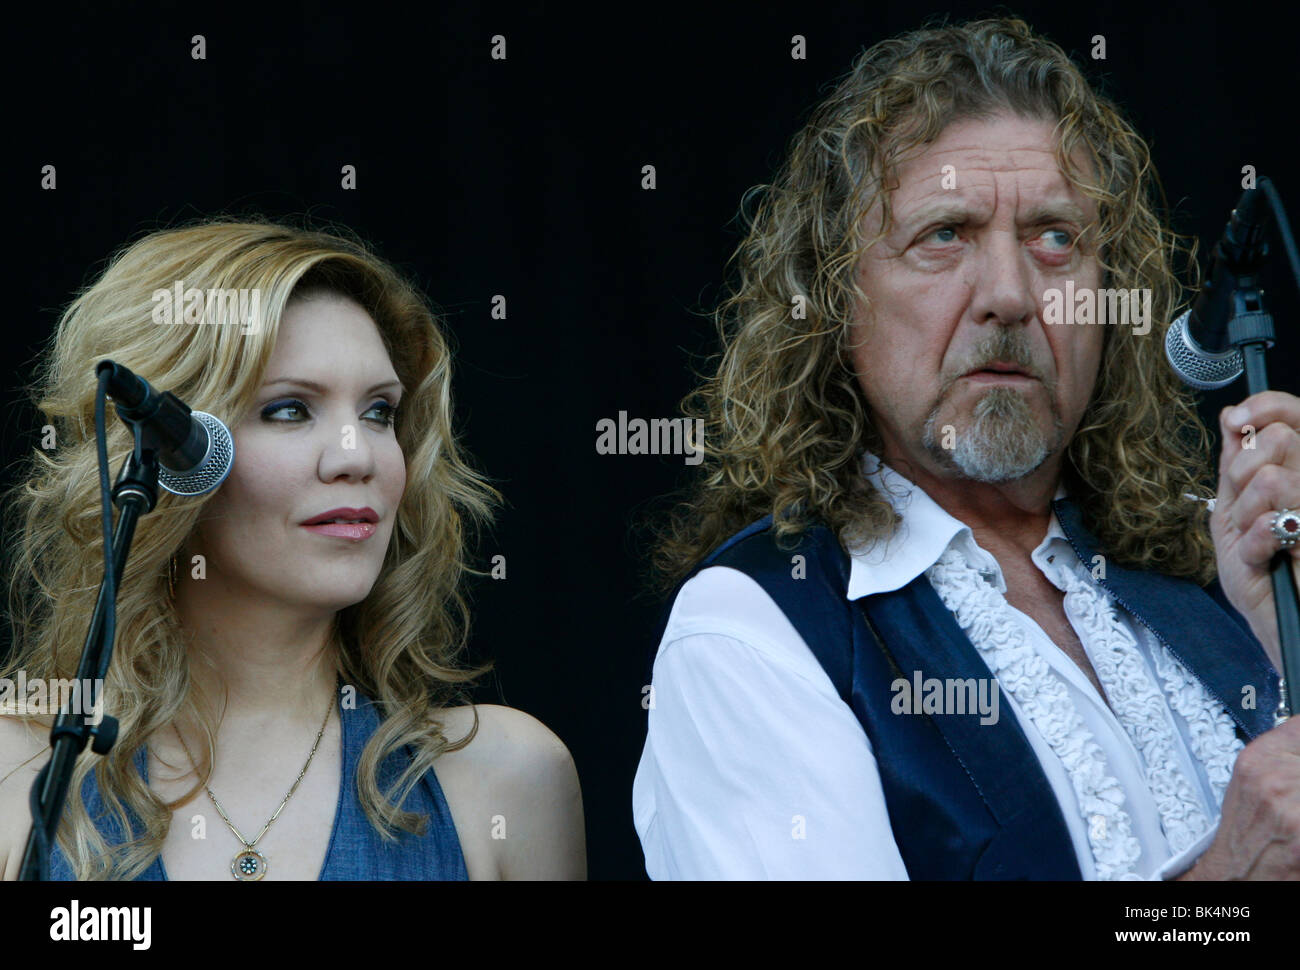 Robert Plant and Alison Krauss perform during a concert. Stock Photo